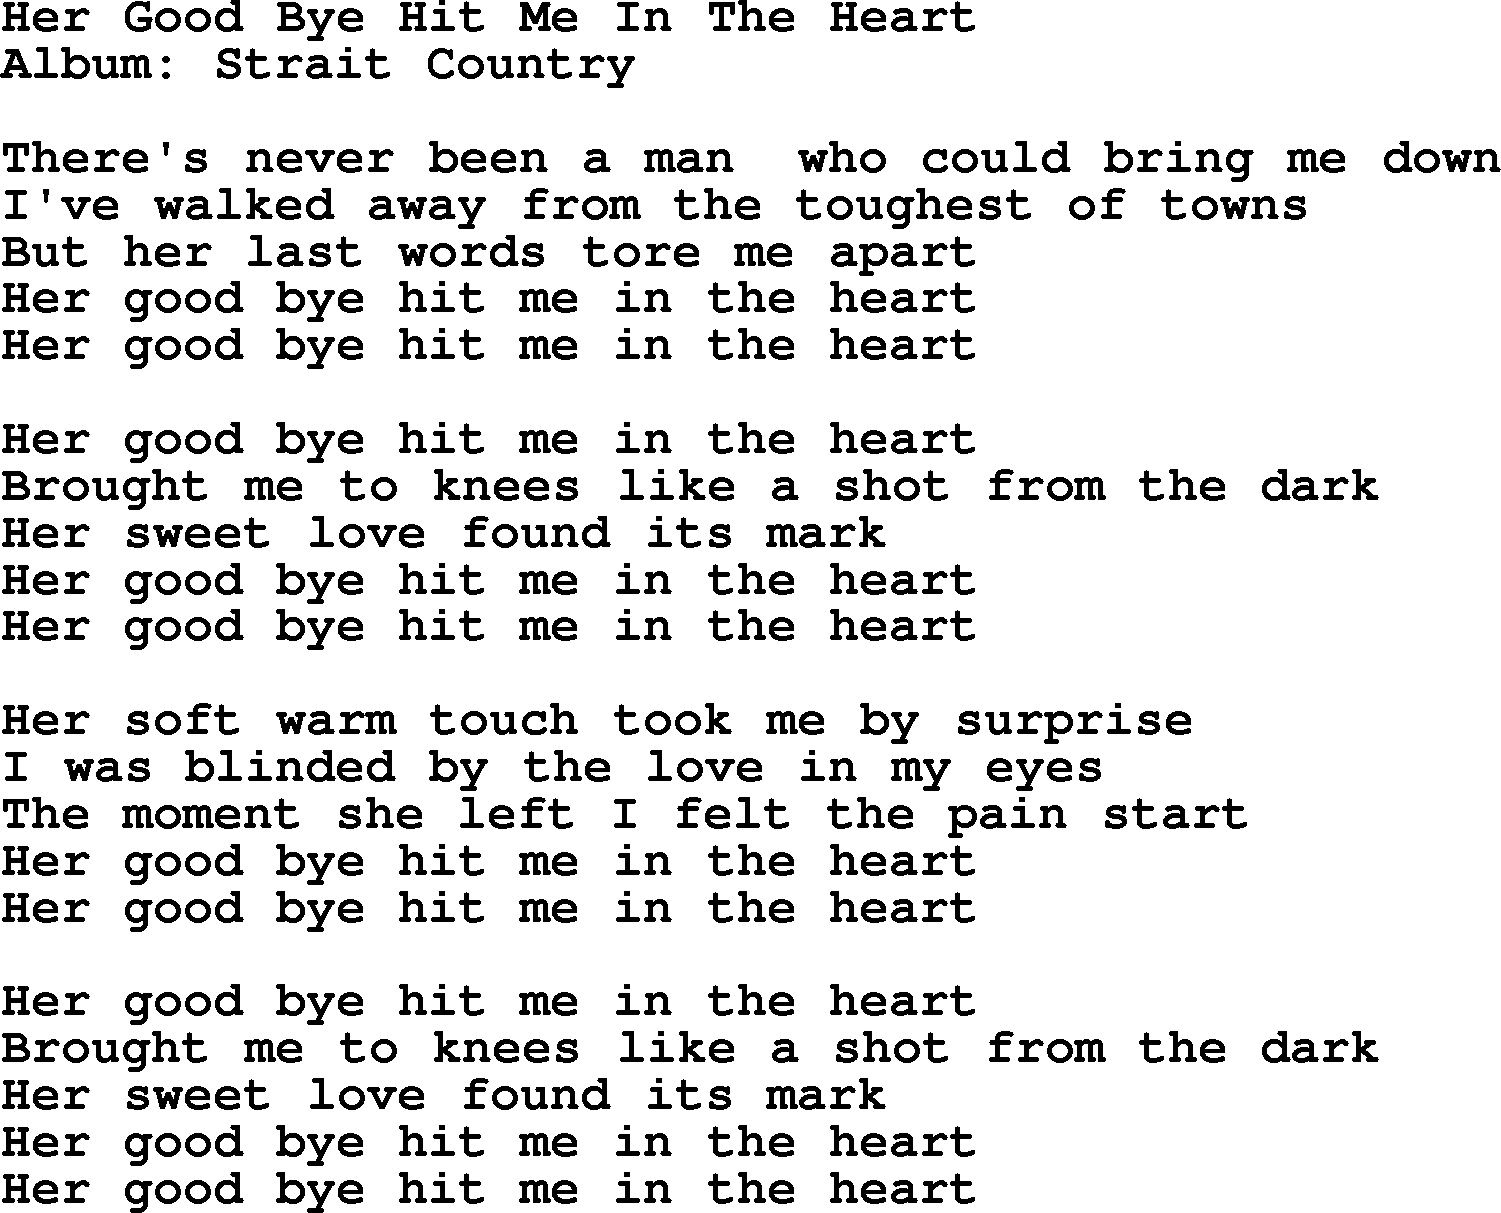 George Strait song: Her Good Bye Hit Me In The Heart, lyrics